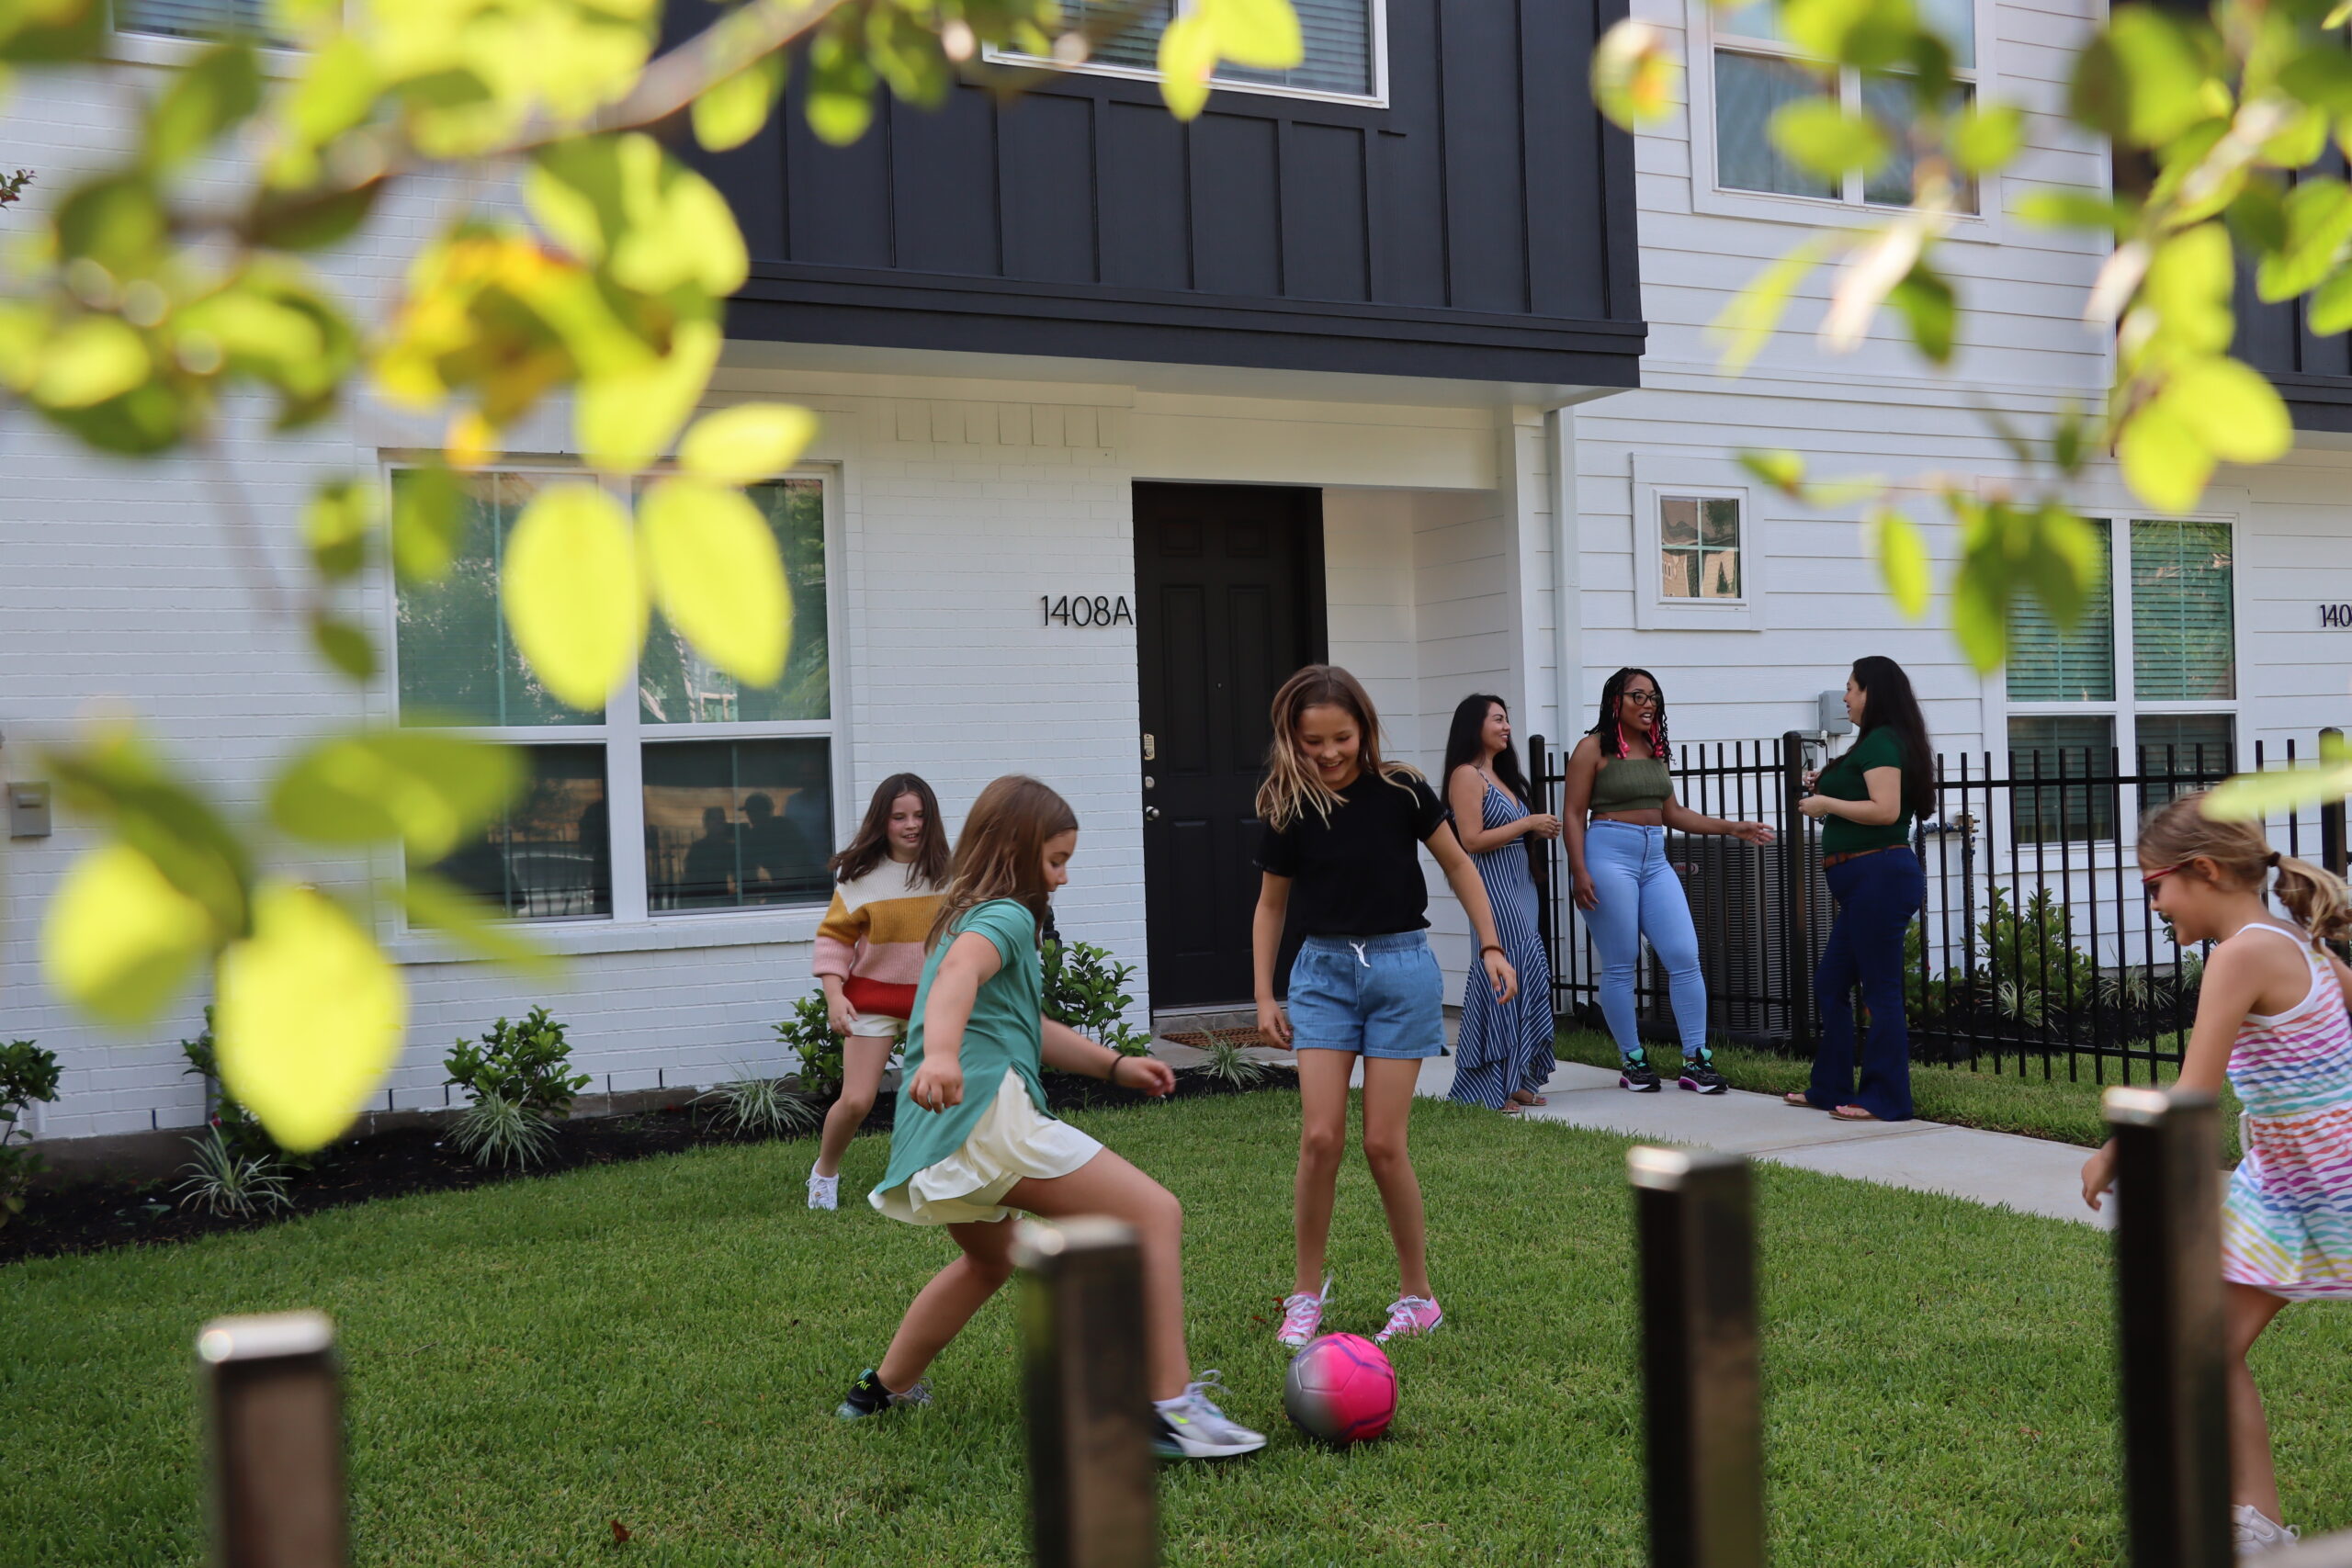 children playing with a ball in a neighborhood in Houston Texas